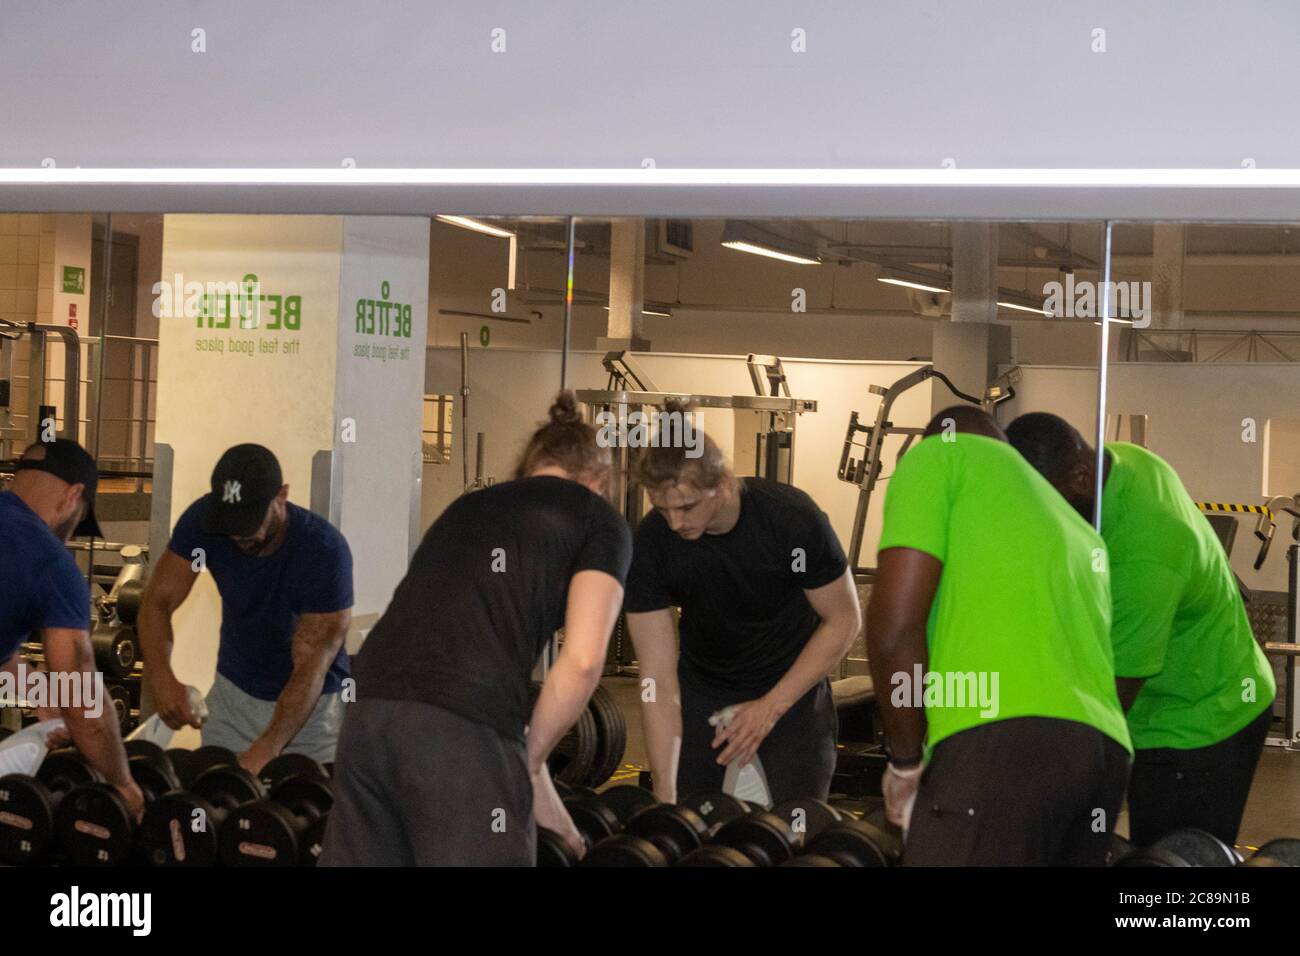 Brentwood, UK. 22nd July, 2020. The Better Gym Brentwood prepares to reopen as the covid-19 Lockdown is relaxed. Staff clean and check equipment as well as practice the new covid secure gym processes. Credit: Ian Davidson/Alamy Live News Stock Photo